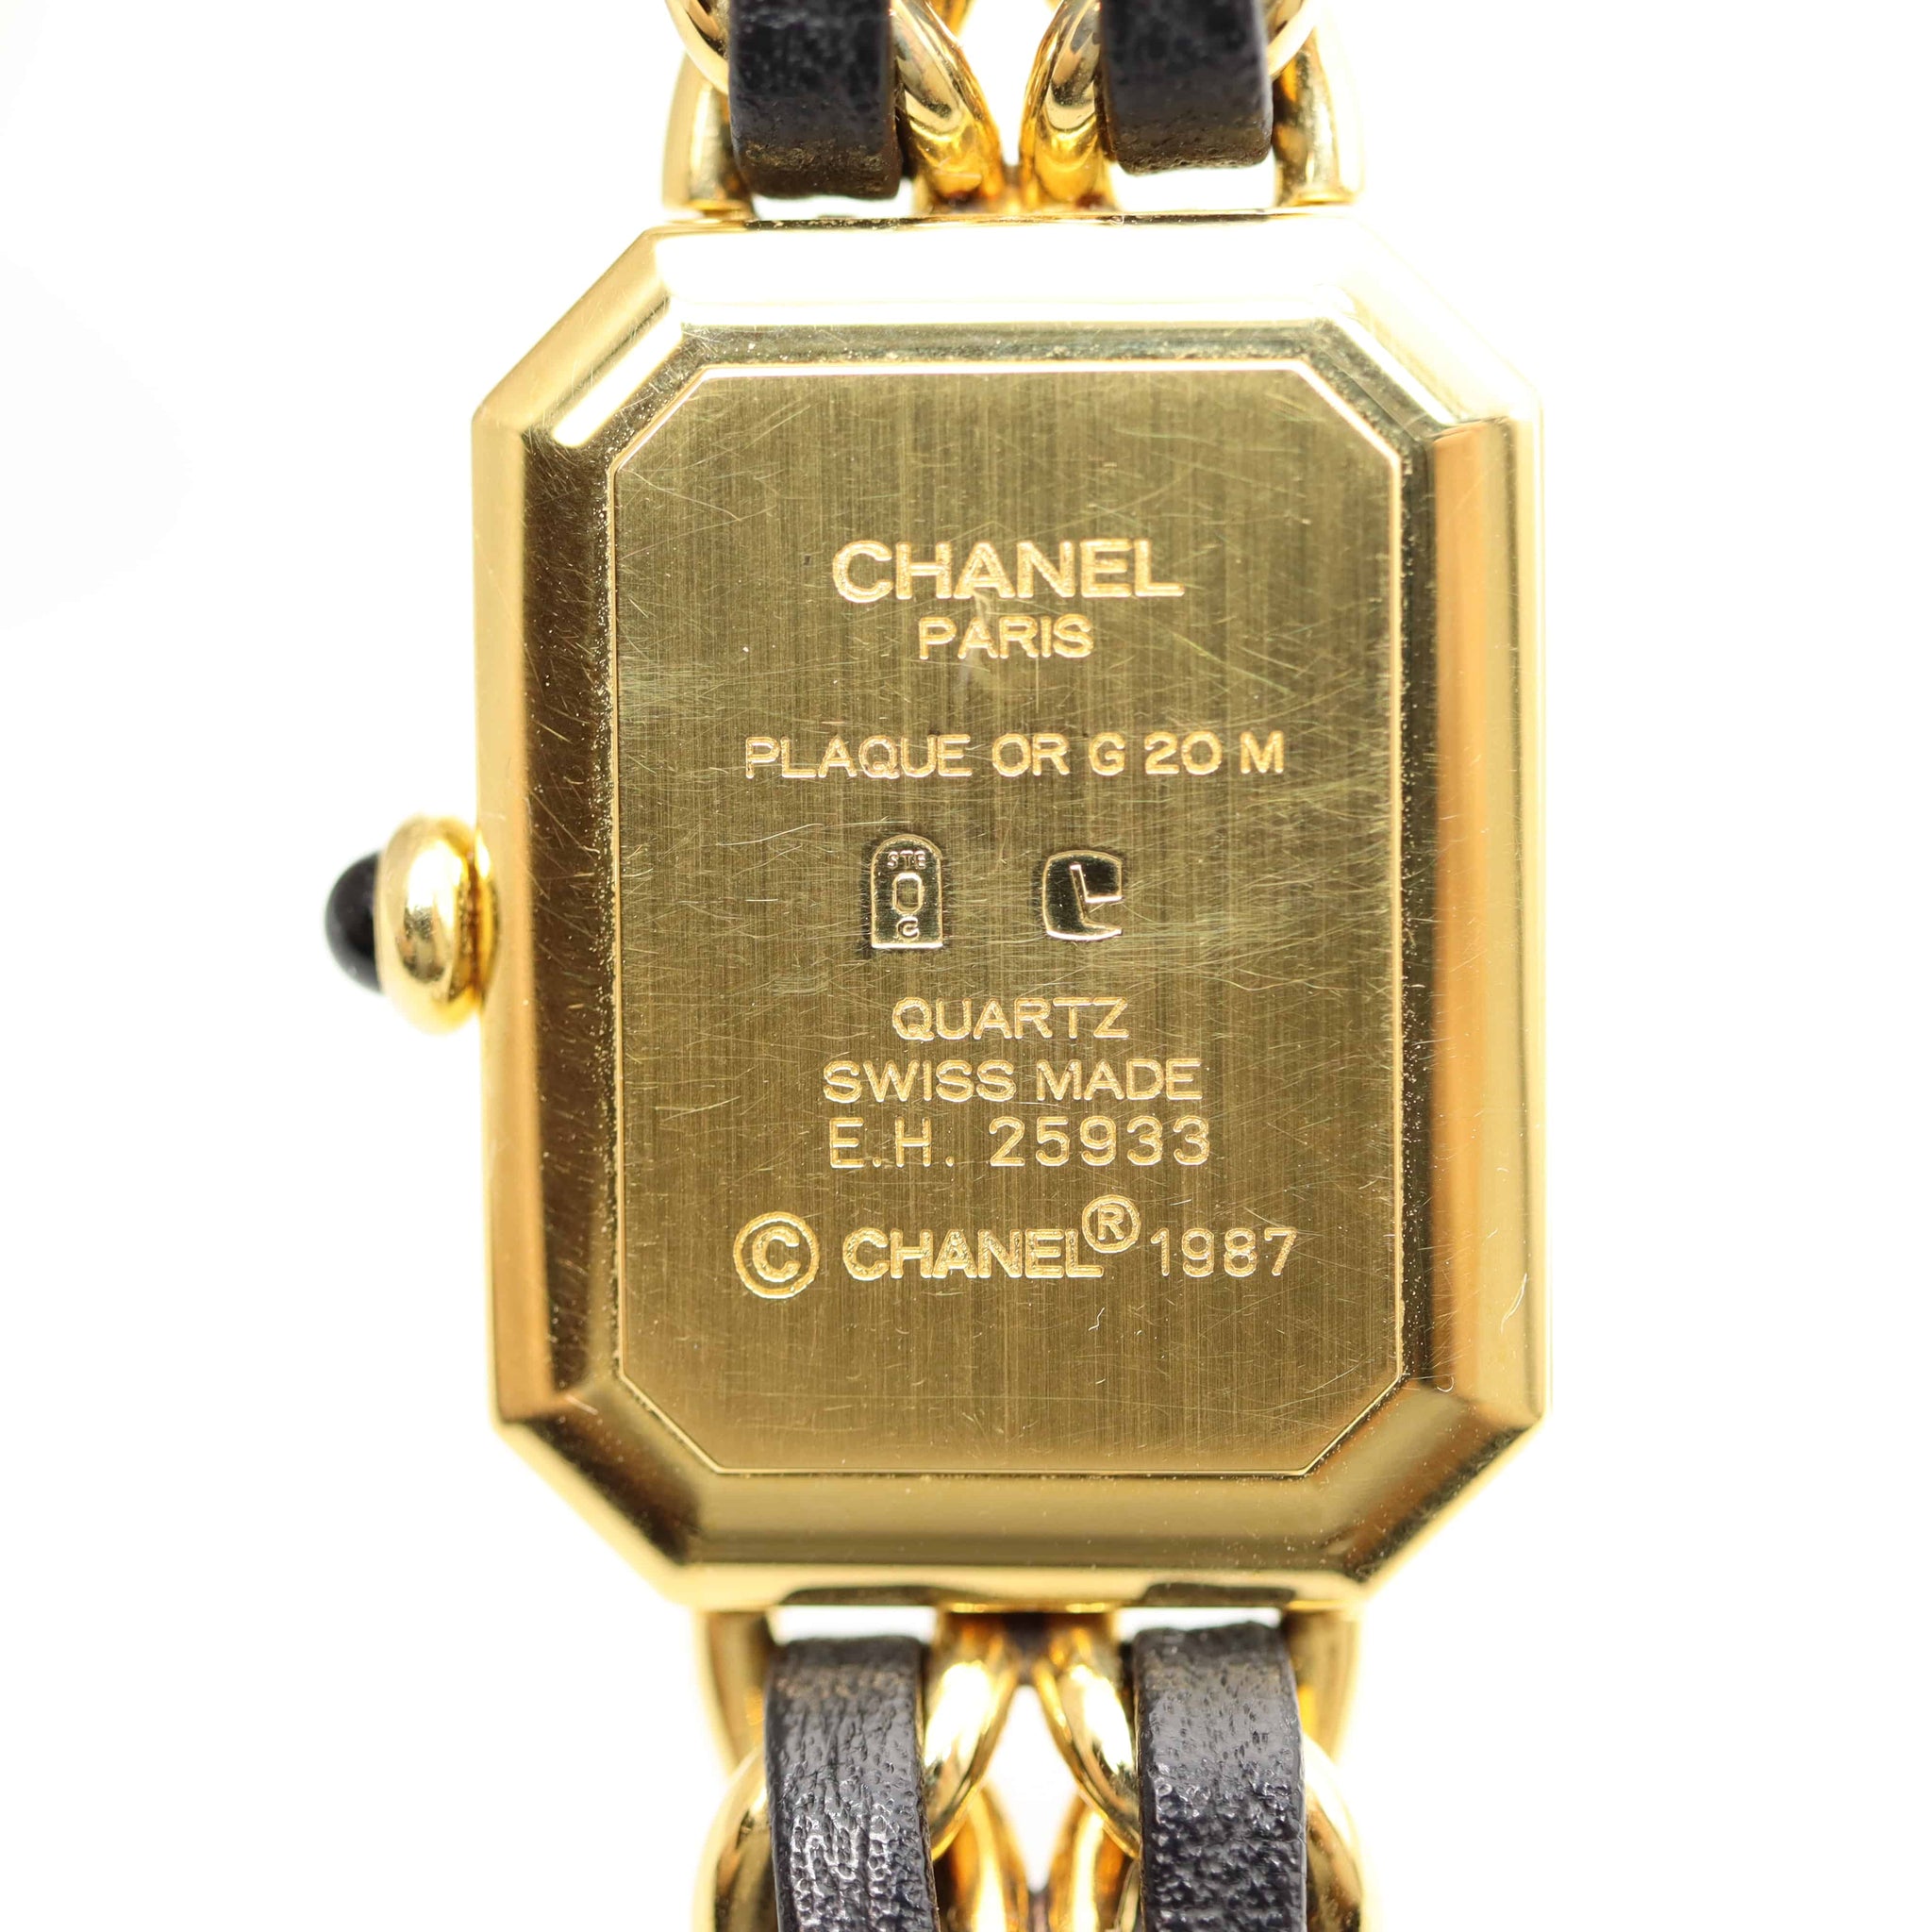 Chanel Vintage 1987 Premiere Watch at 1stDibs  chanel premiere watch 1987,  chanel paris plaque or g20m quartz swiss made, chanel vintage watch 1987